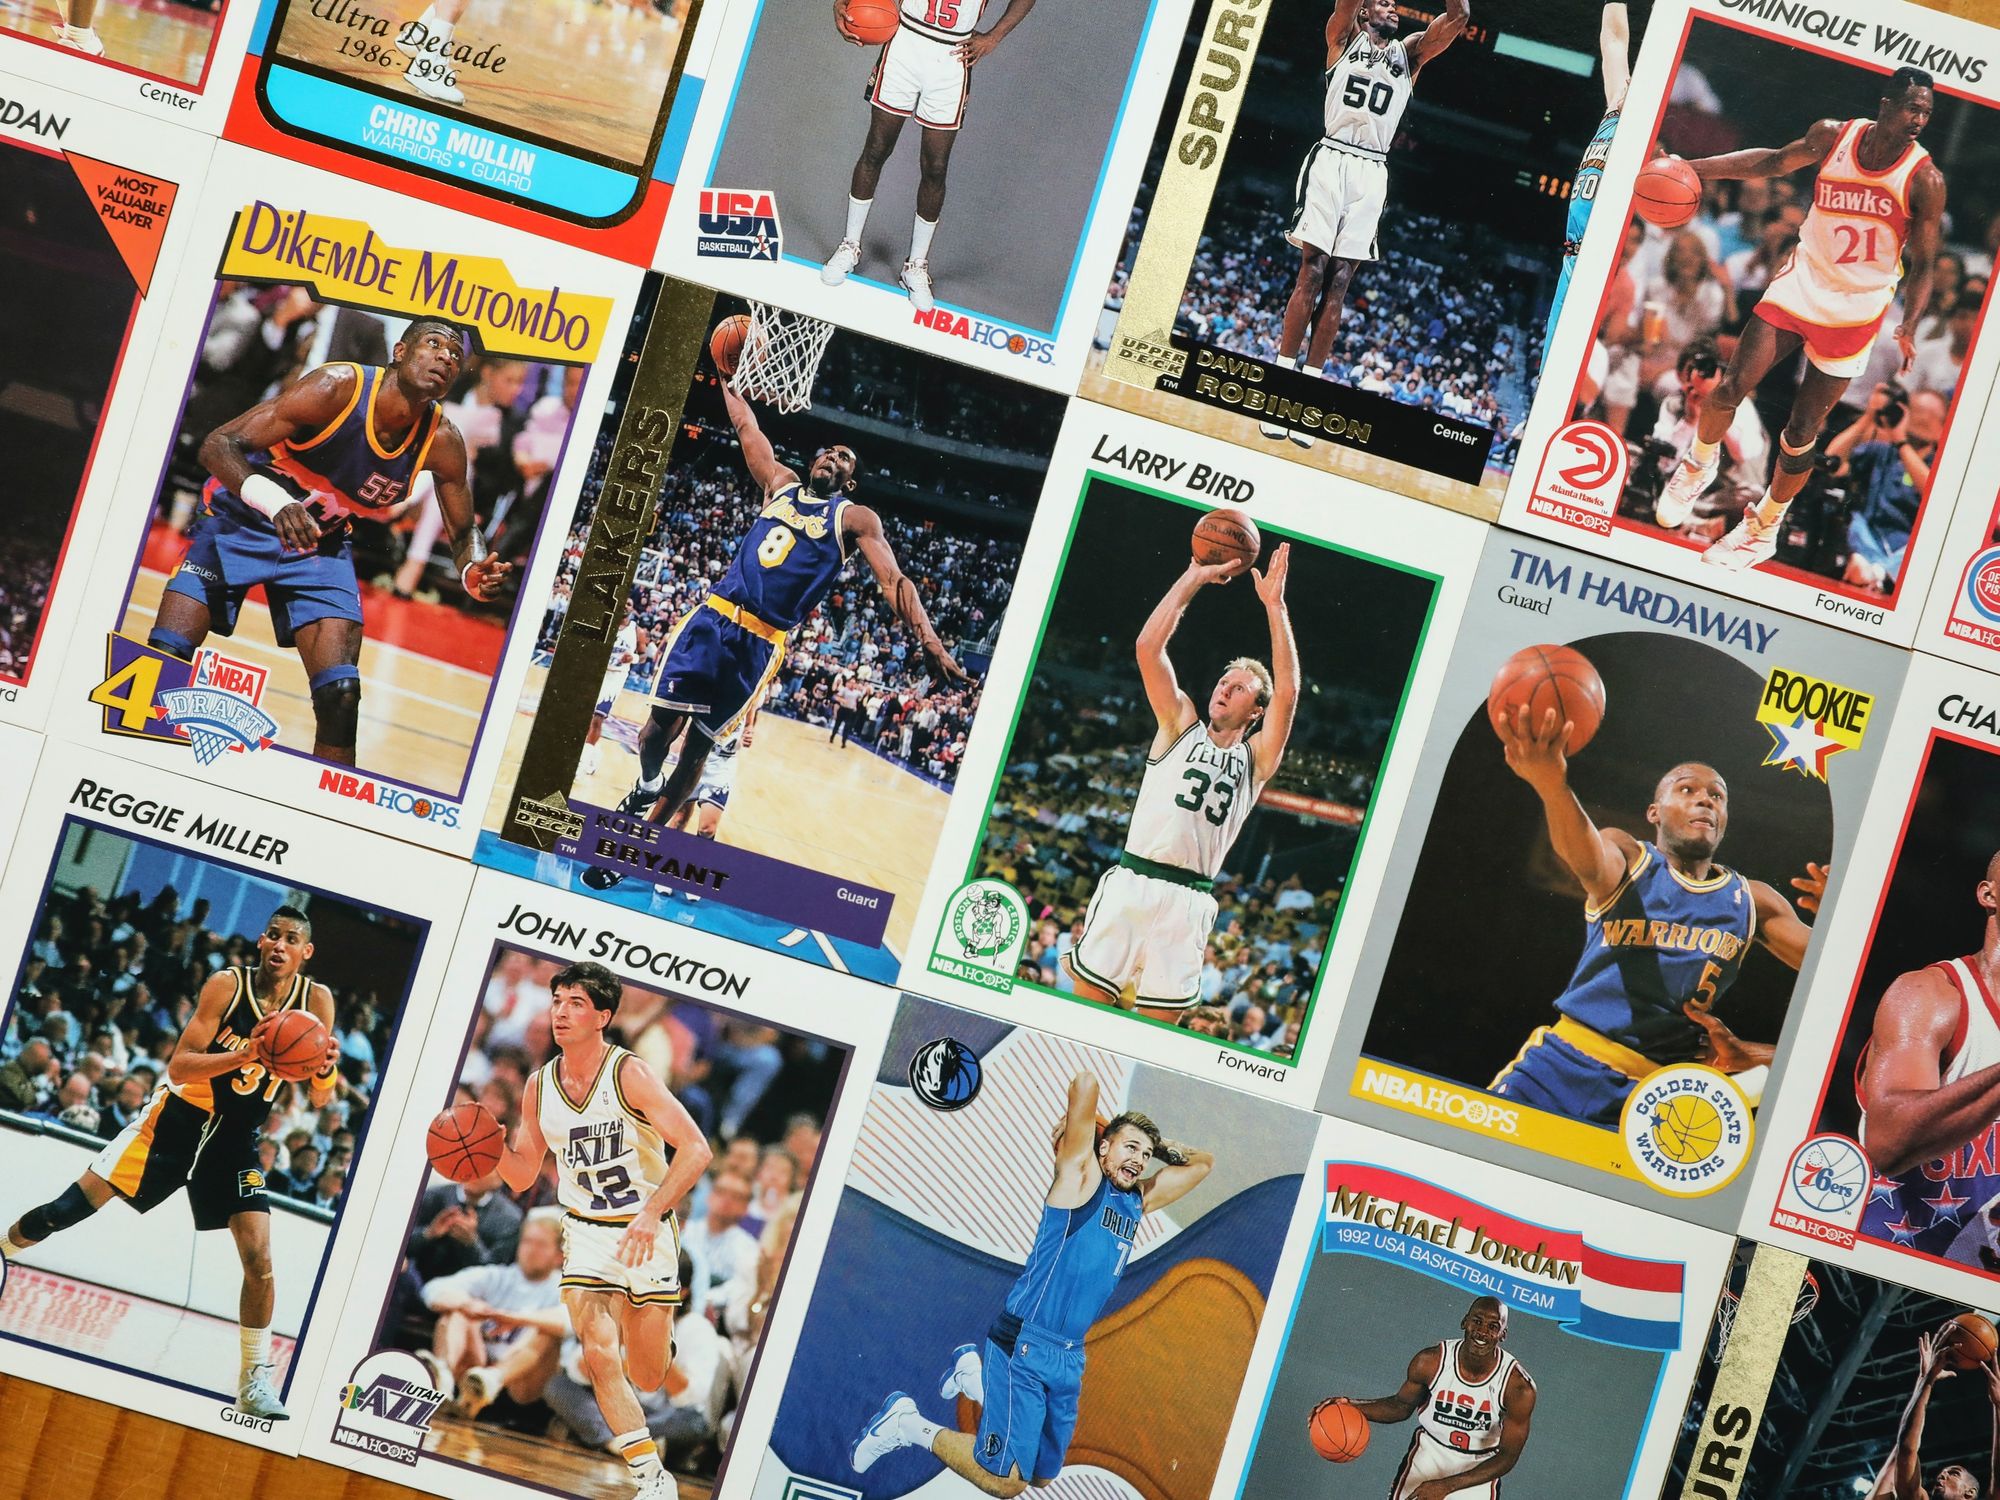 Two VCs See Trading Cards as a Great Investment and are Starting a Fund to Trade Them